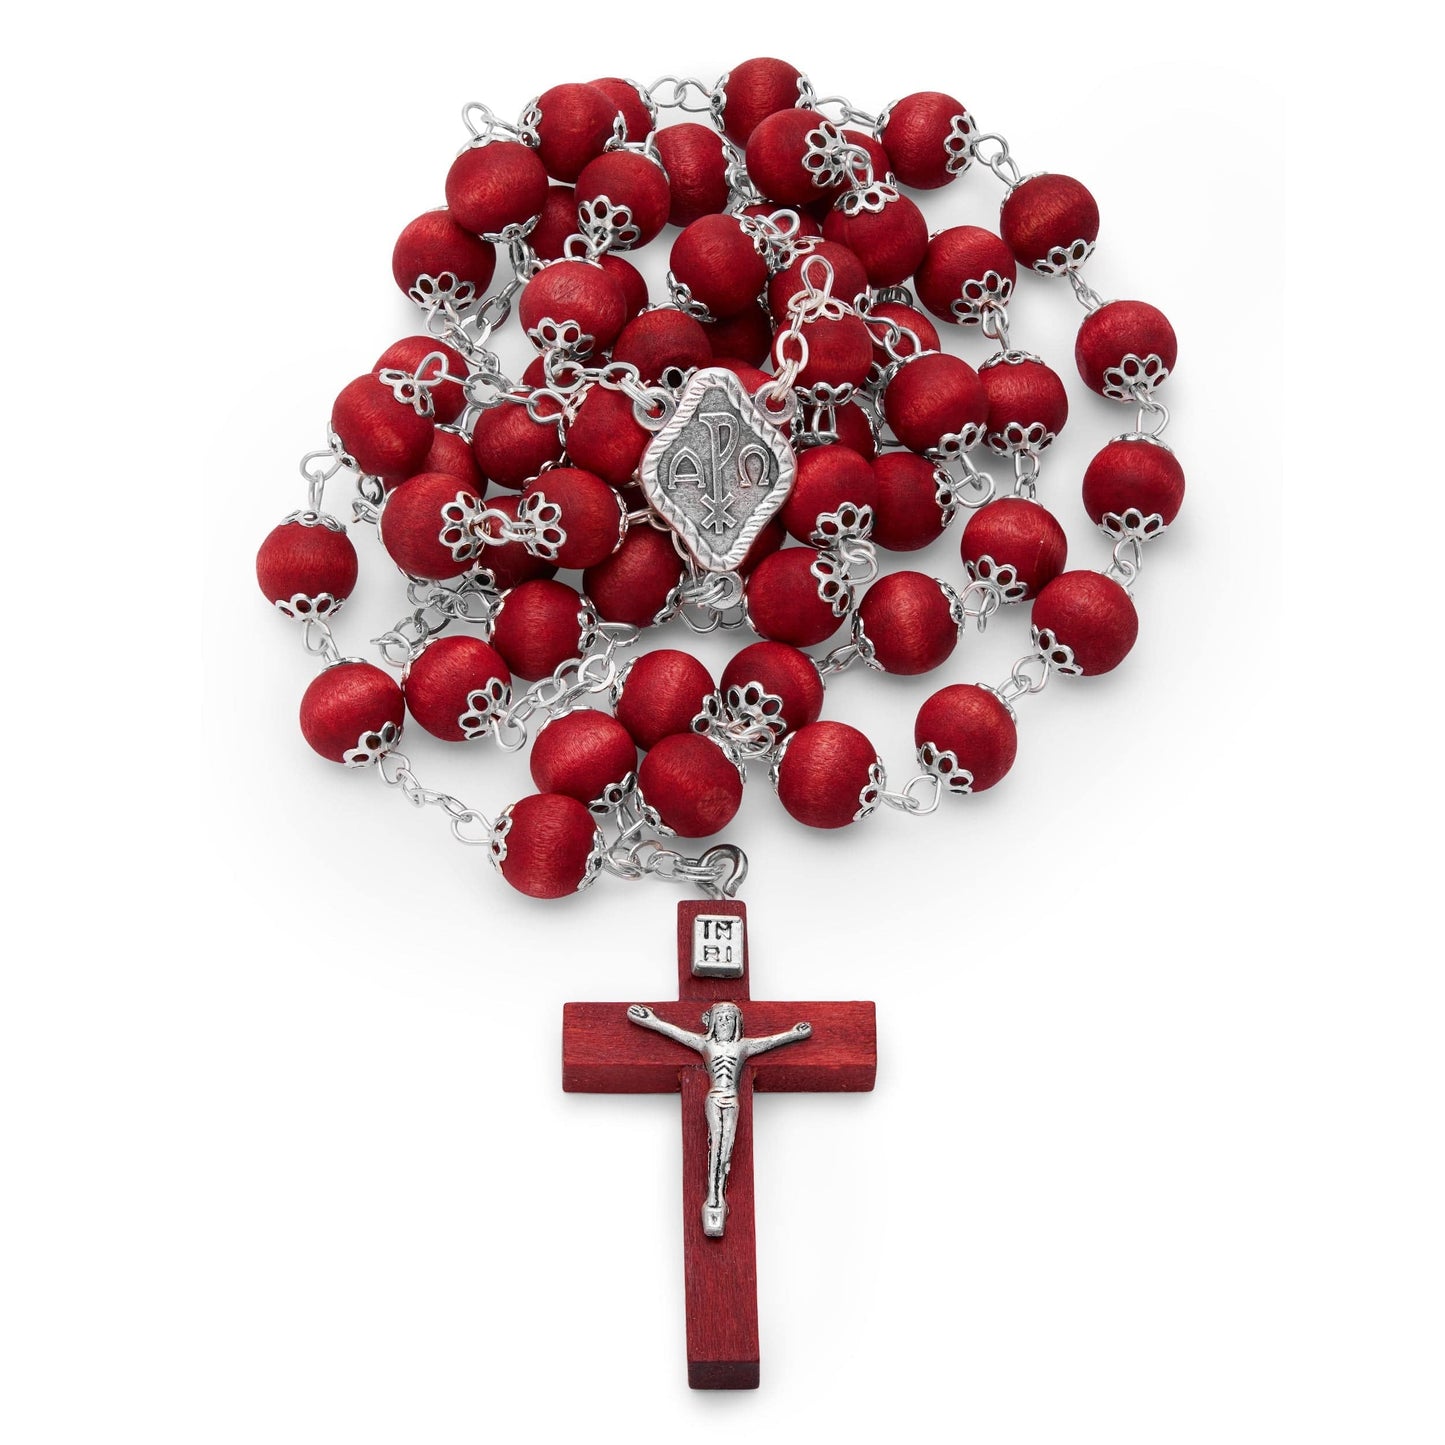 MONDO CATTOLICO Prayer Beads 63 cm (28.8 in) / 8 mm (0.31 in) Capped Rose Petals Rosary Beads